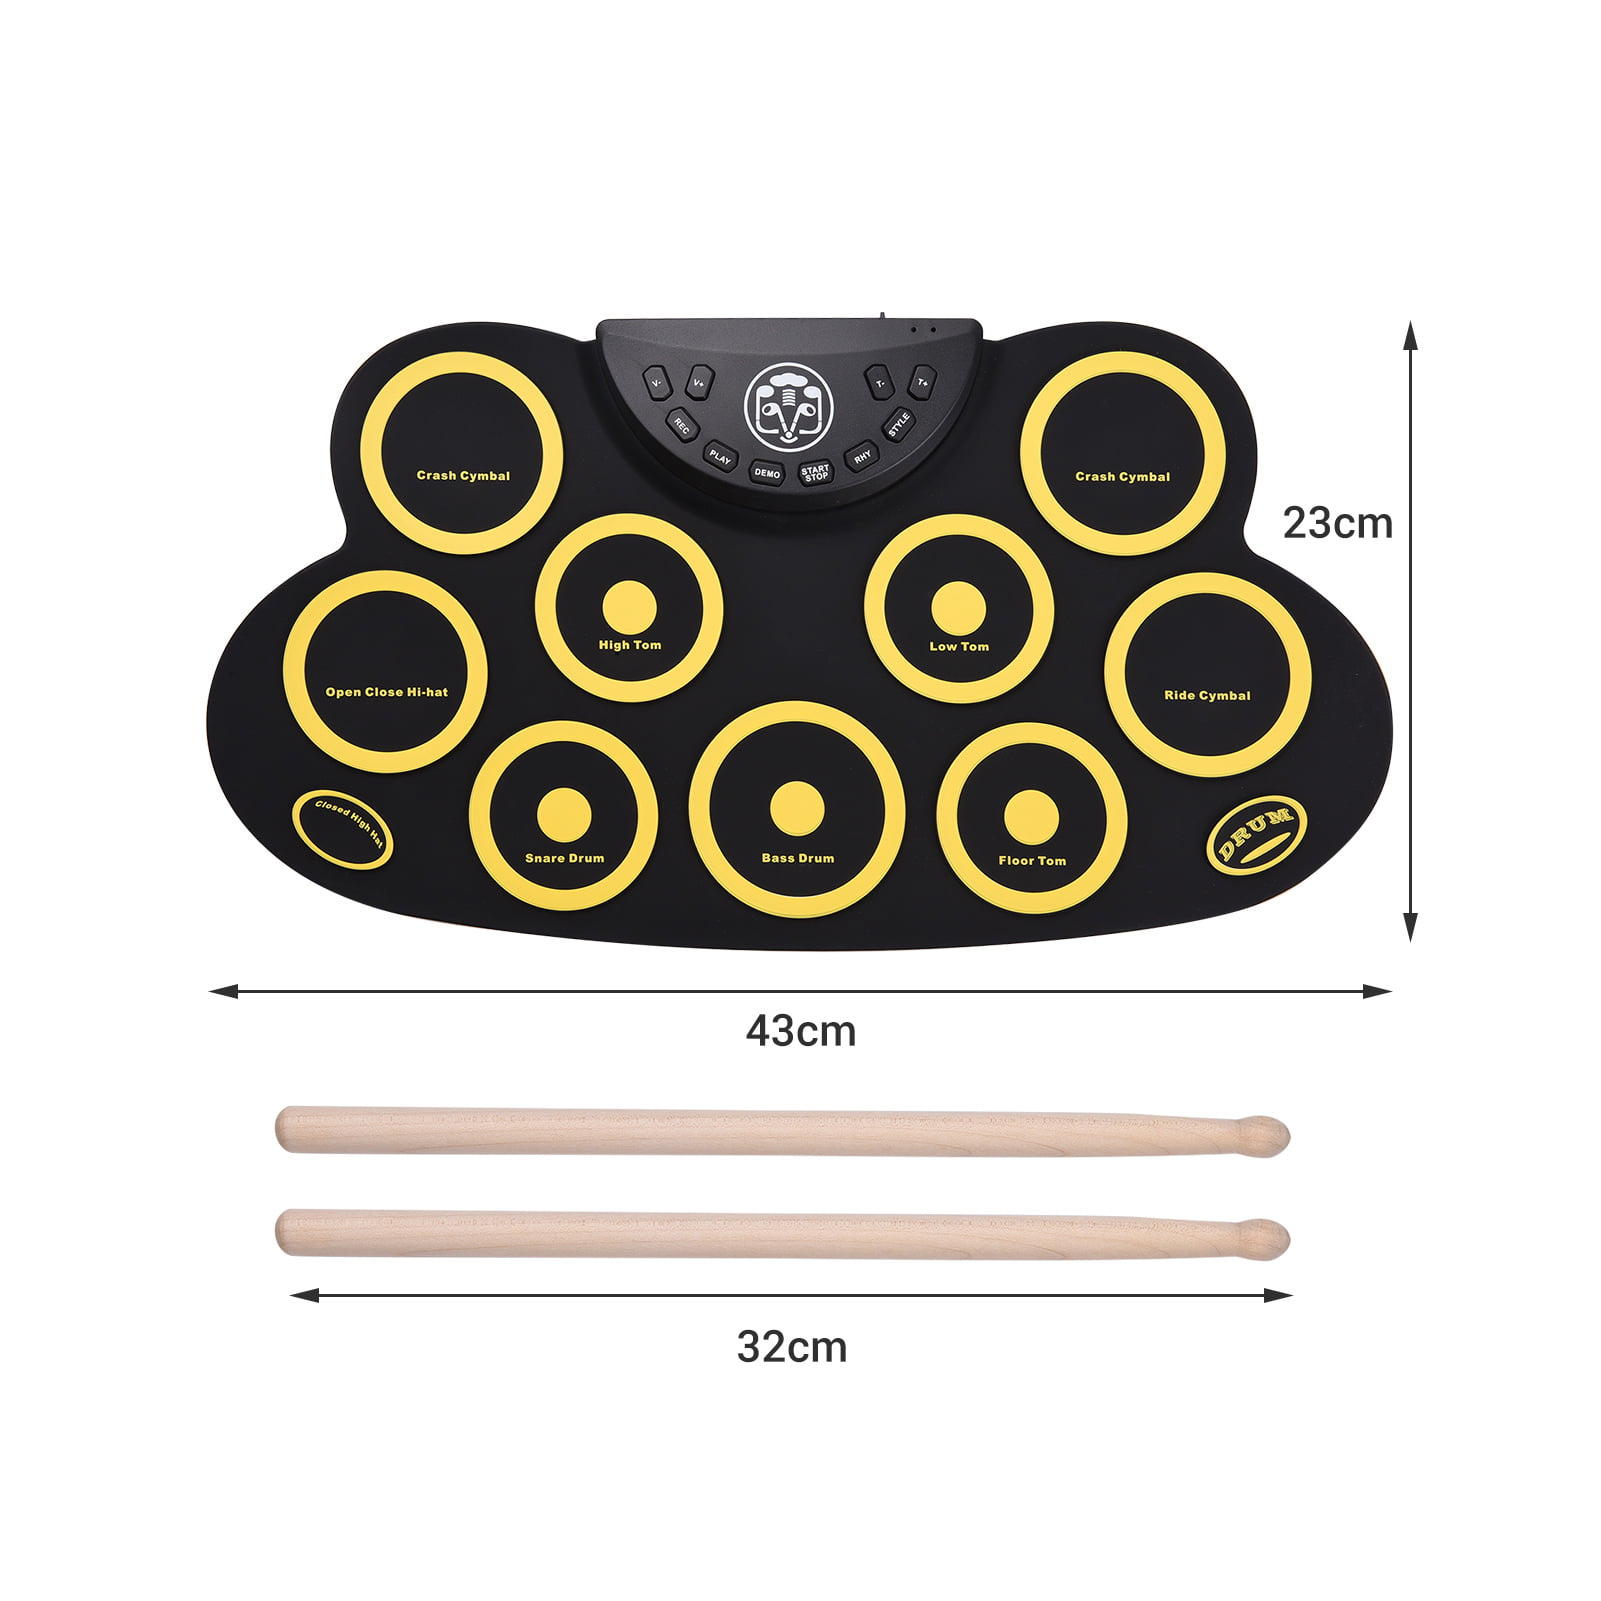 Muslady Electronic Silicone Drum Kit Percussion Instrument Roll Up Drum Set 10 Drumpads Built in Double Speakers and Reverb Microphone Rechargeable LIthium Battery with Drumsticks and Foot Pedals 